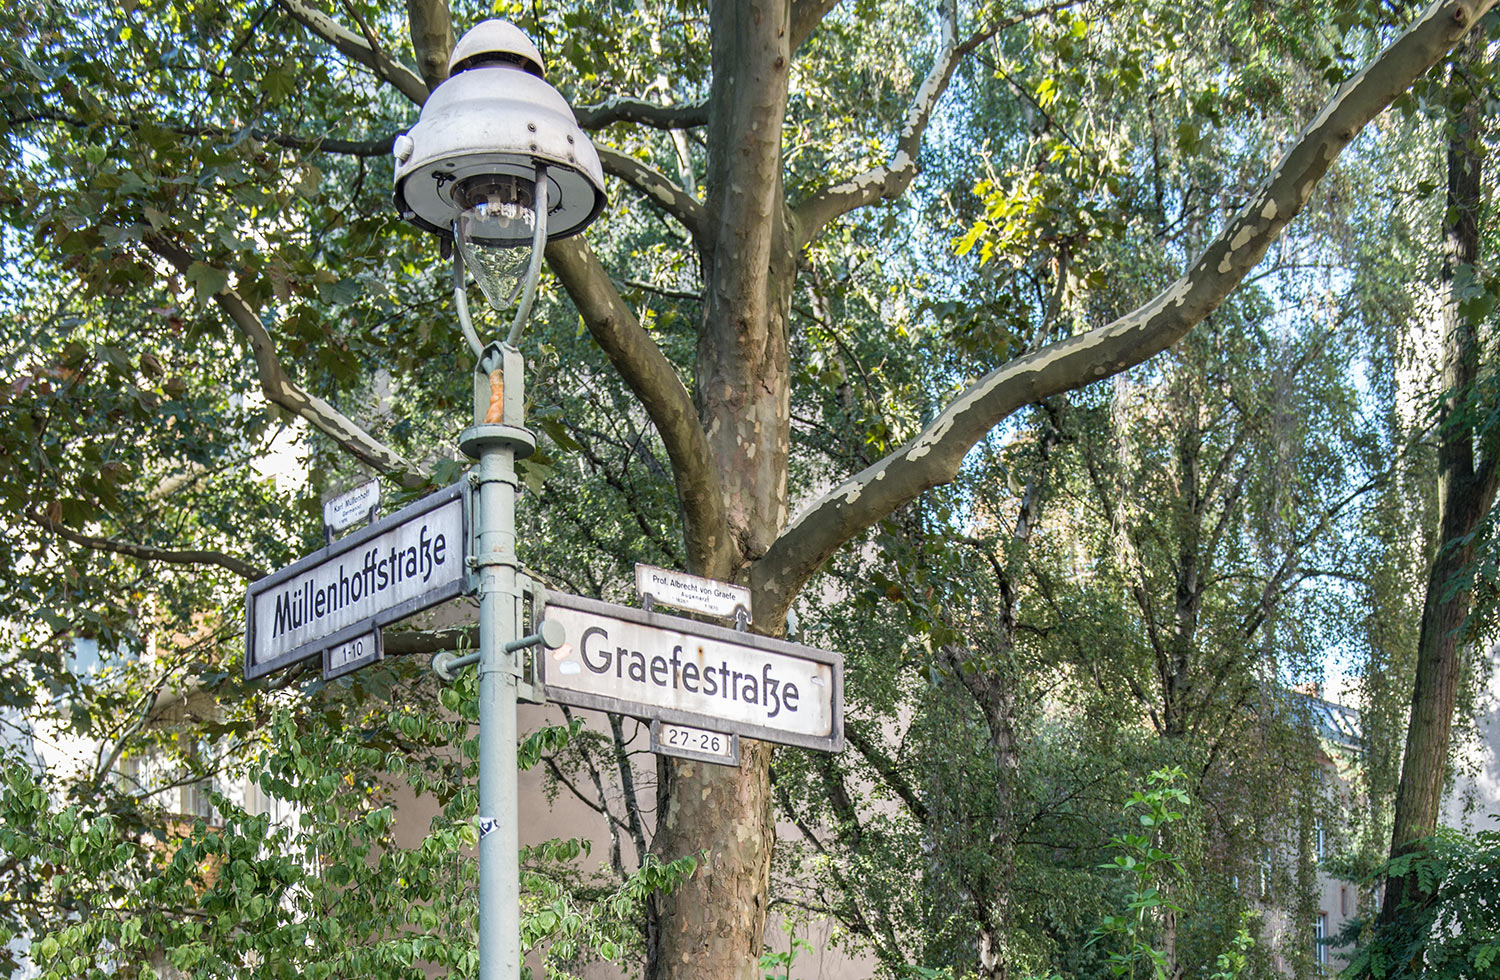 Streetlamp with the streetsign of Graefestraße and Müllenhofstraße attached, with a tree in the background. One of Berlin's premier Ramen joints has moved to the neighbourhood, will there be something new to eat on the menu as well?